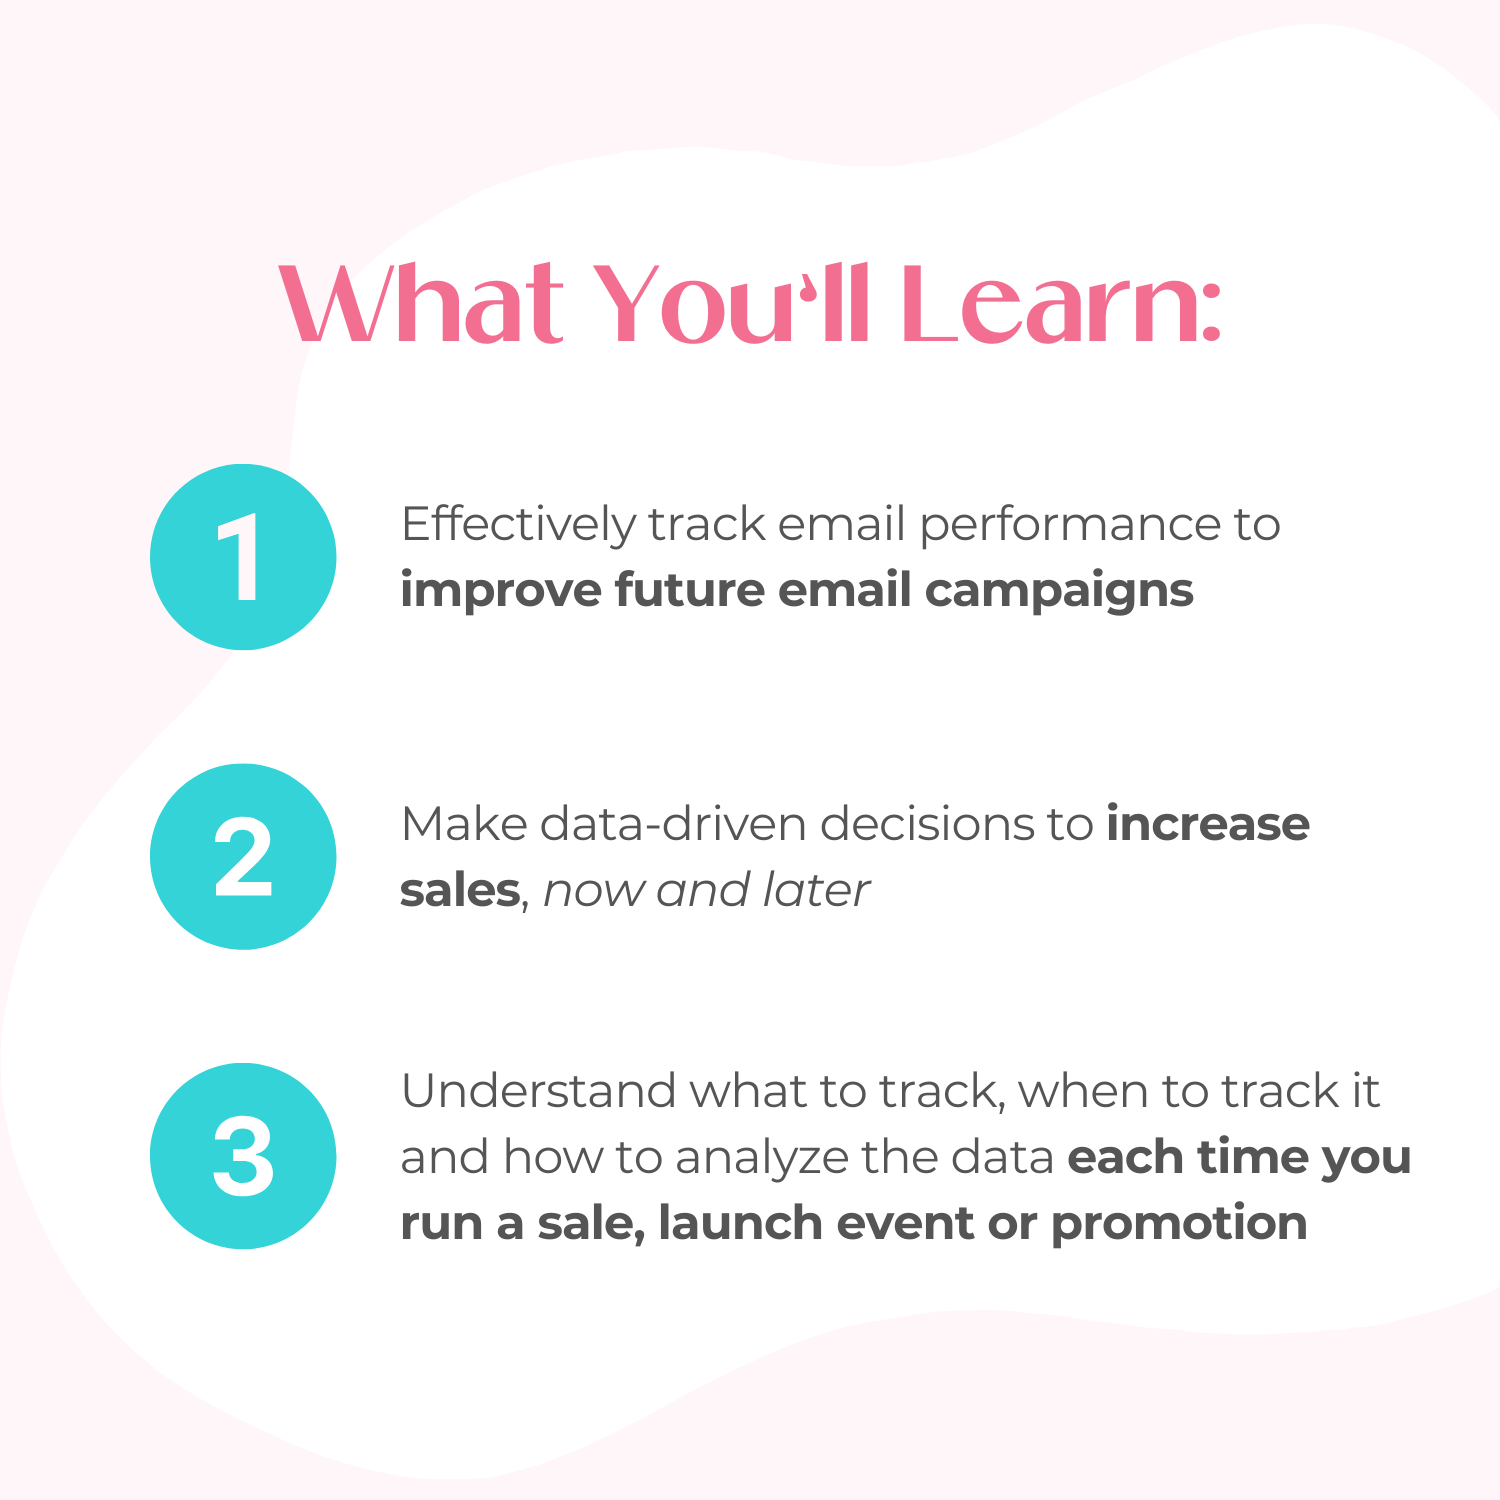 A graphic with the text, “What You’ll Learn: 1) Effectively track email performance to improve future email campaigns, 2) Make data-driven decisions to increase sales, now and later, 3) Understand what to track, when to track it and how to analyze the data each time you run a sale, launch event or promotion.”